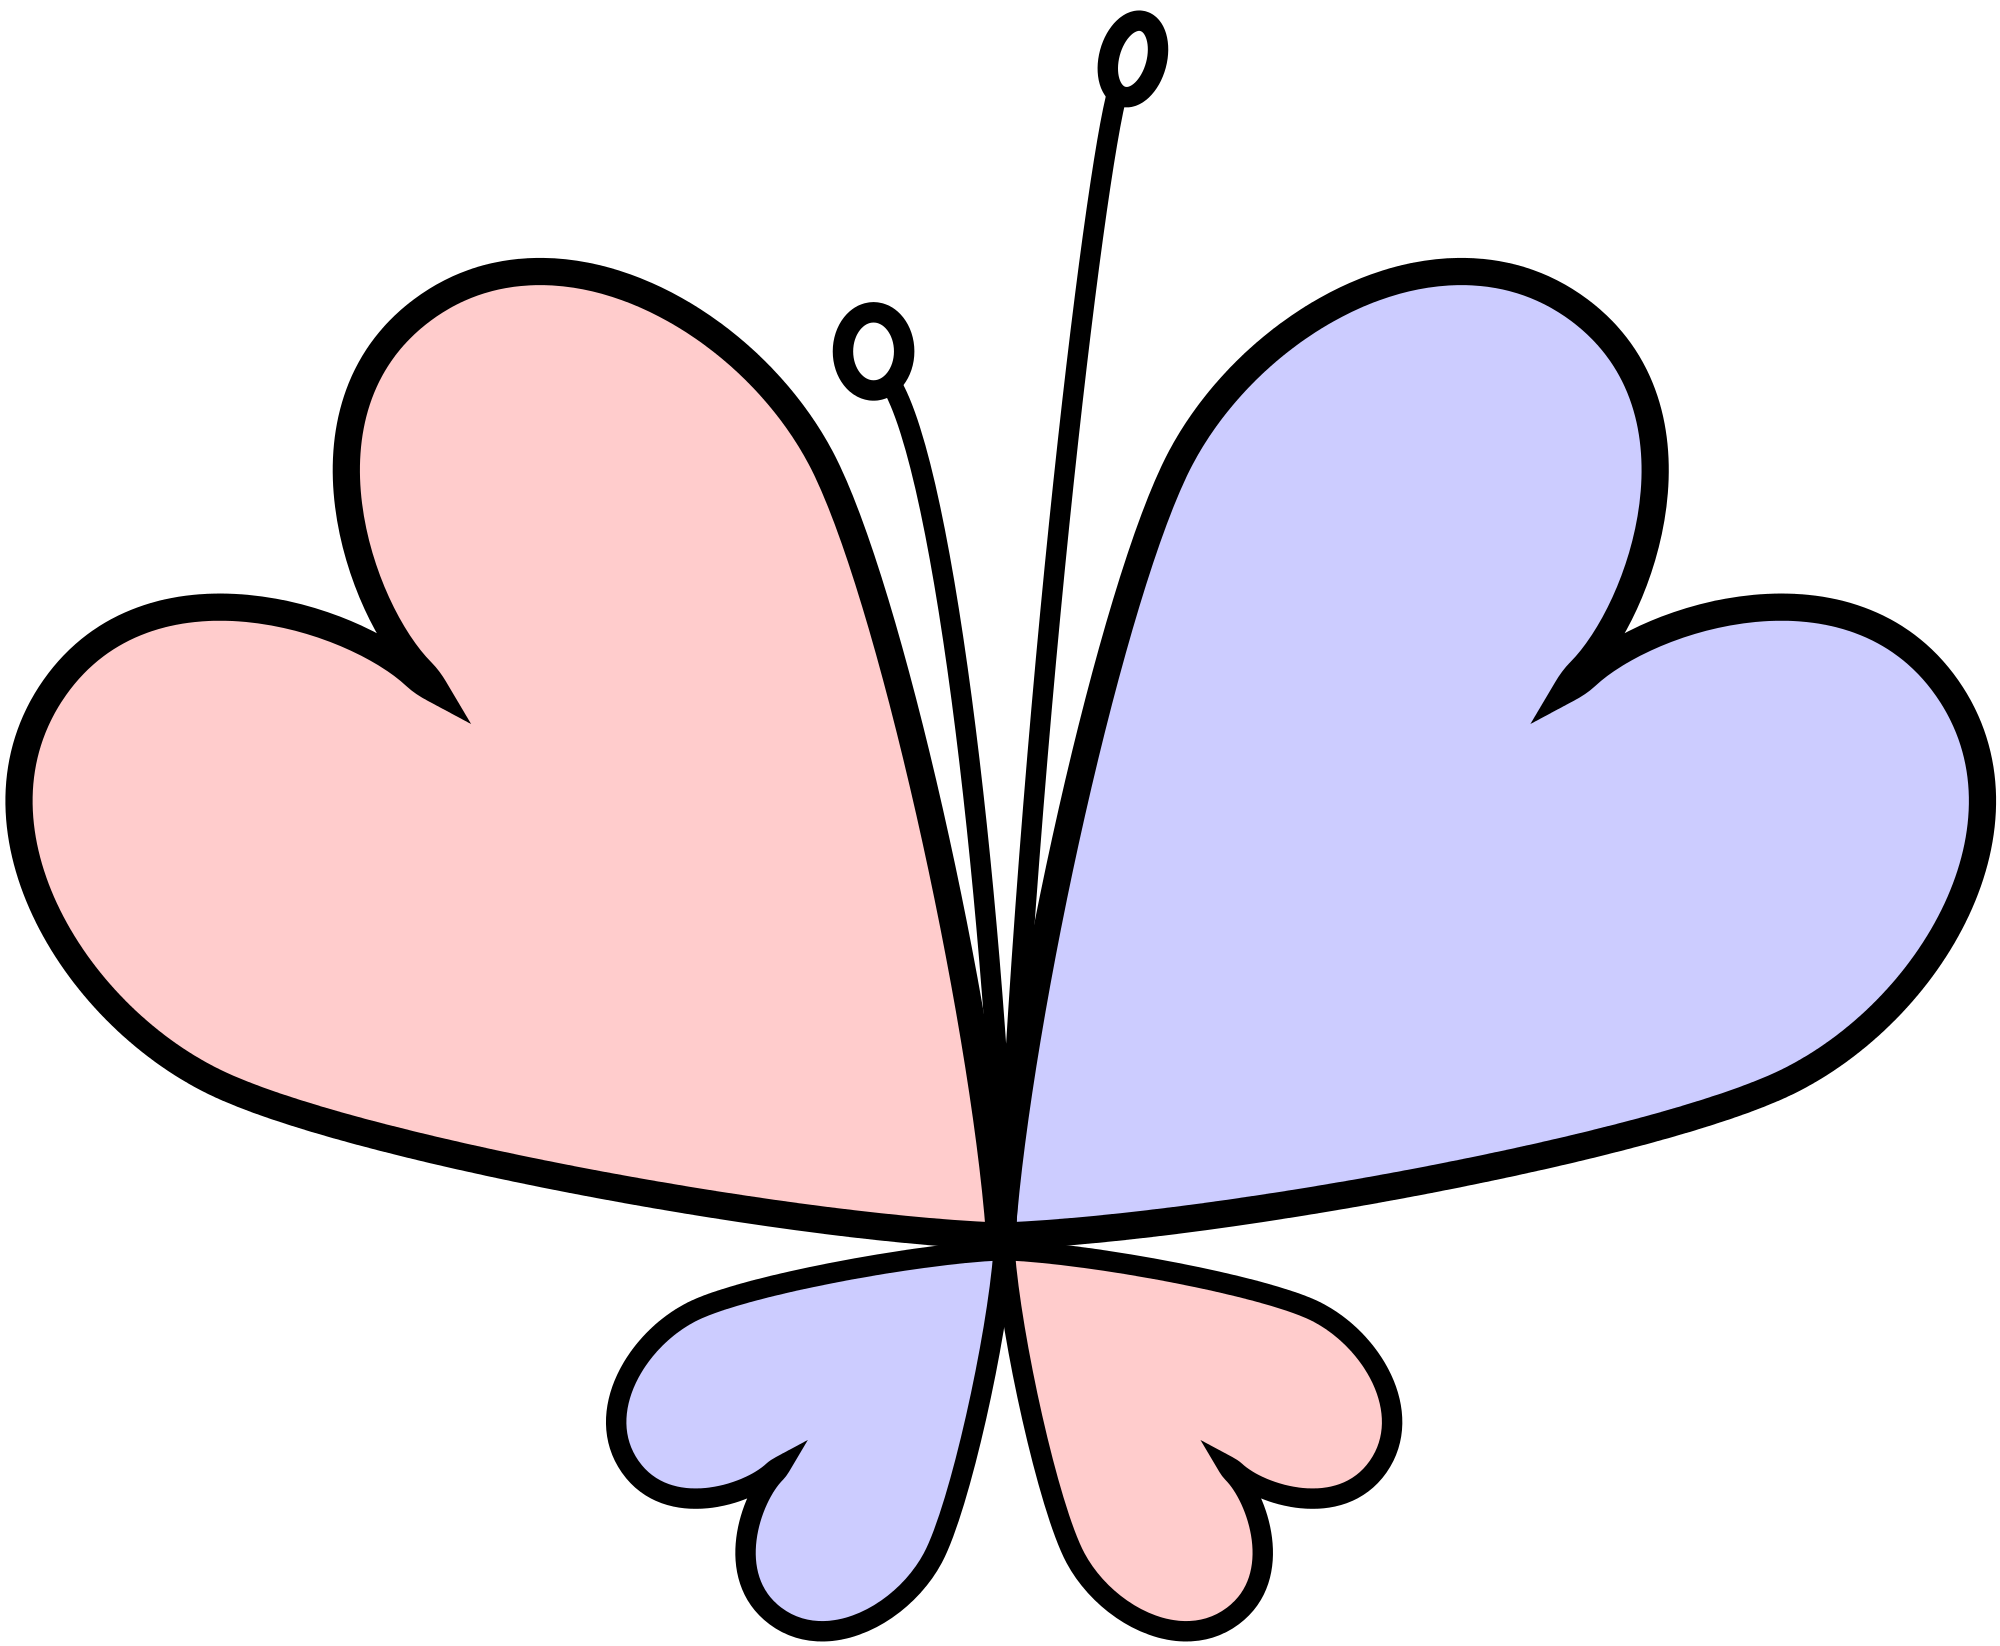 2000px-Pedophile-butterfly.svg.png